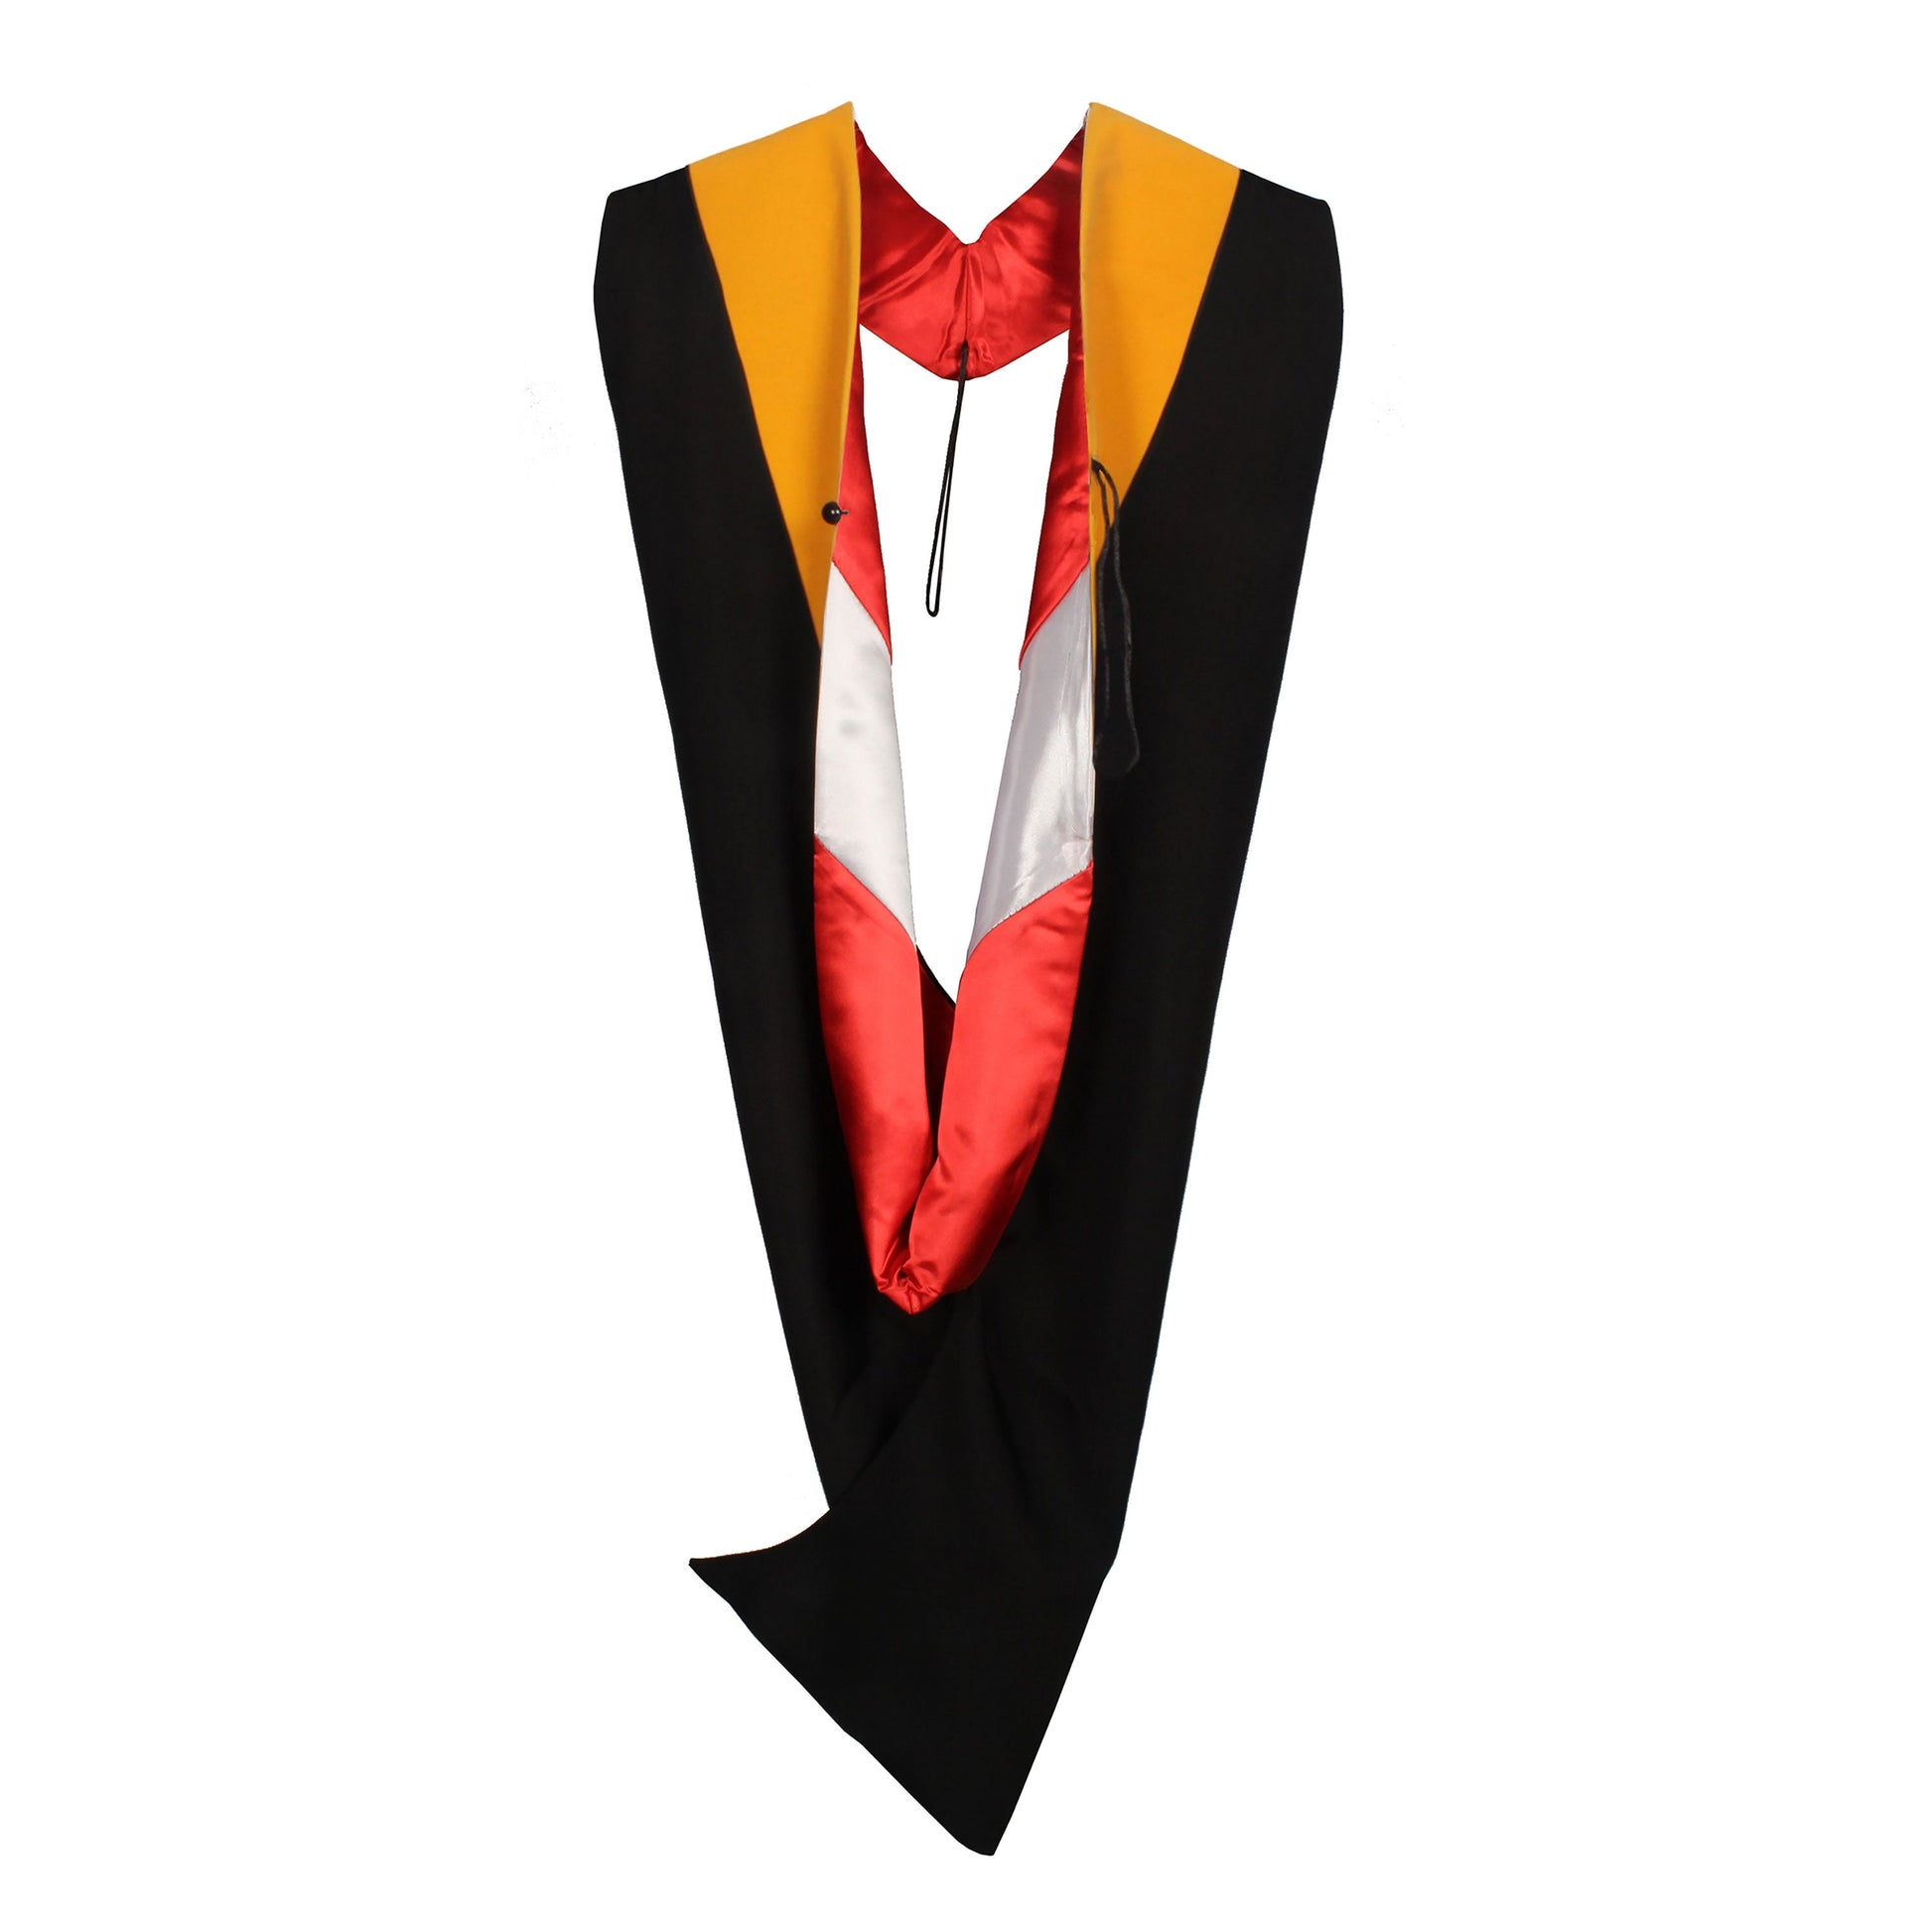 Classic Master Graduation Gown And Colorful tassel Caps & Master Graduation Hood in Various Color-CA graduation